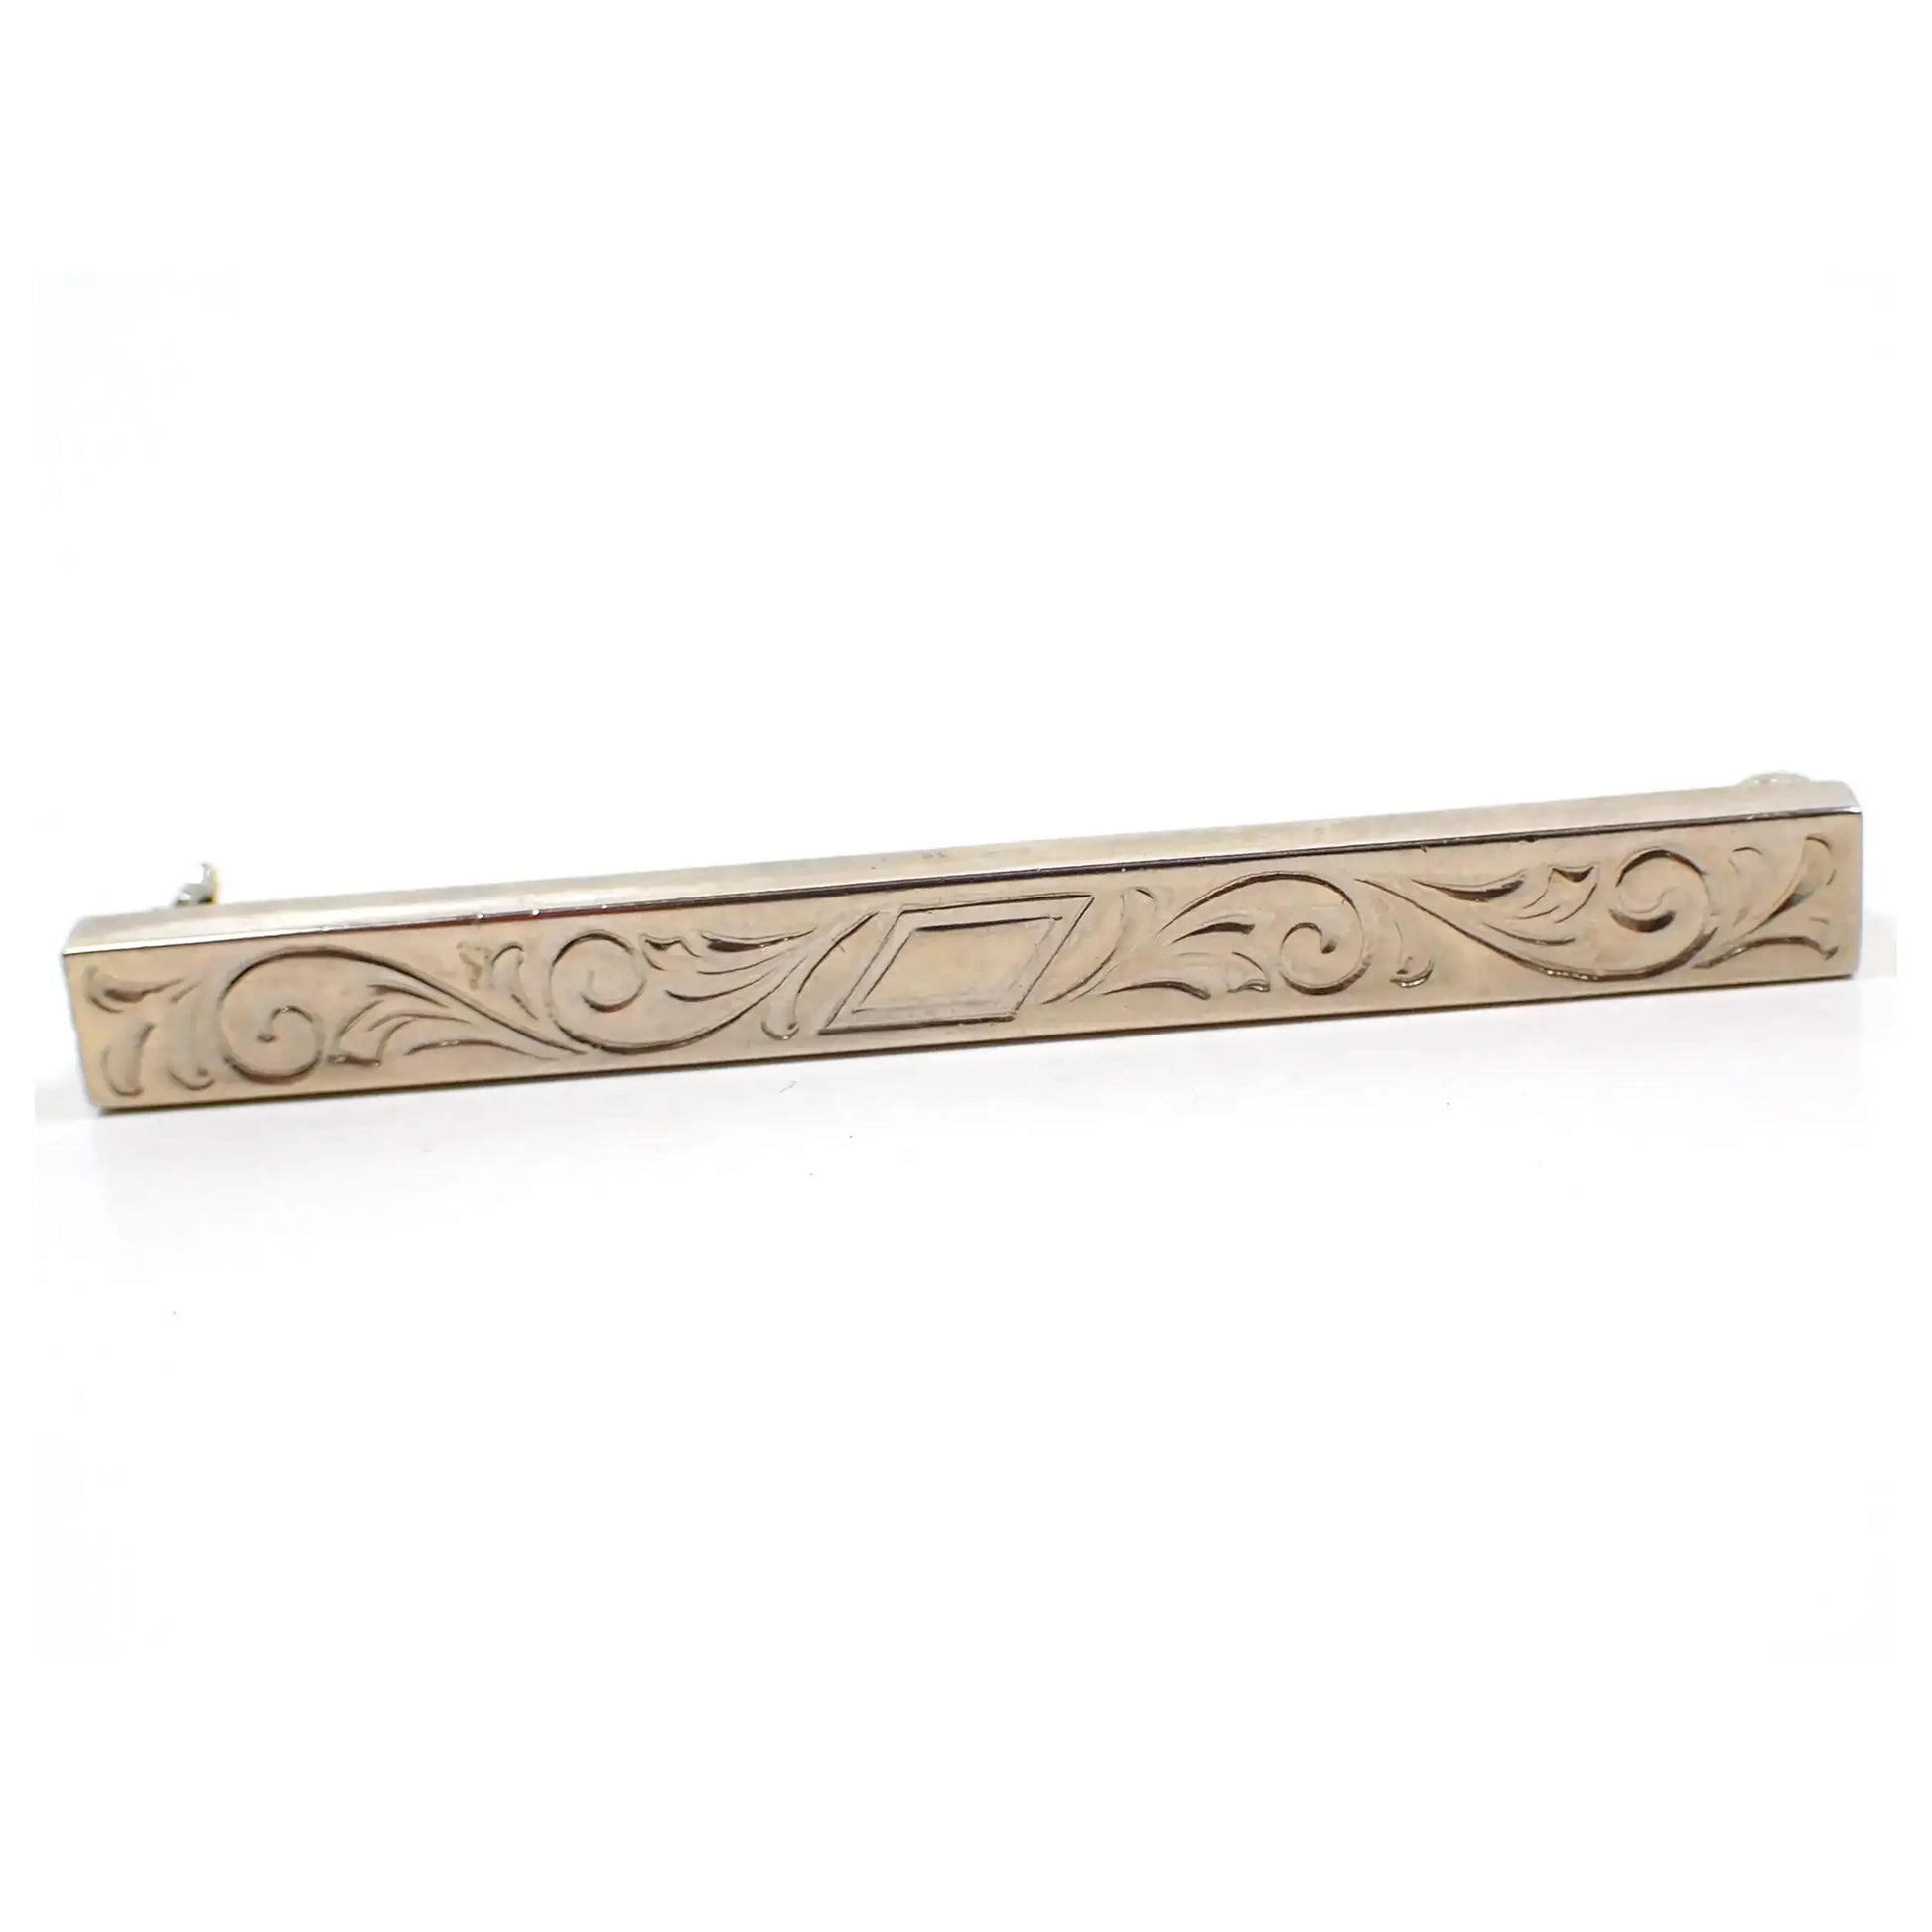 Enlarged front view of the Mid Century vintage bar brooch. It has a longer rectangle shape with an angled rectangle in the middle and scroll like leaf designs on either side. The metal is a slightly darkened silver tone color.